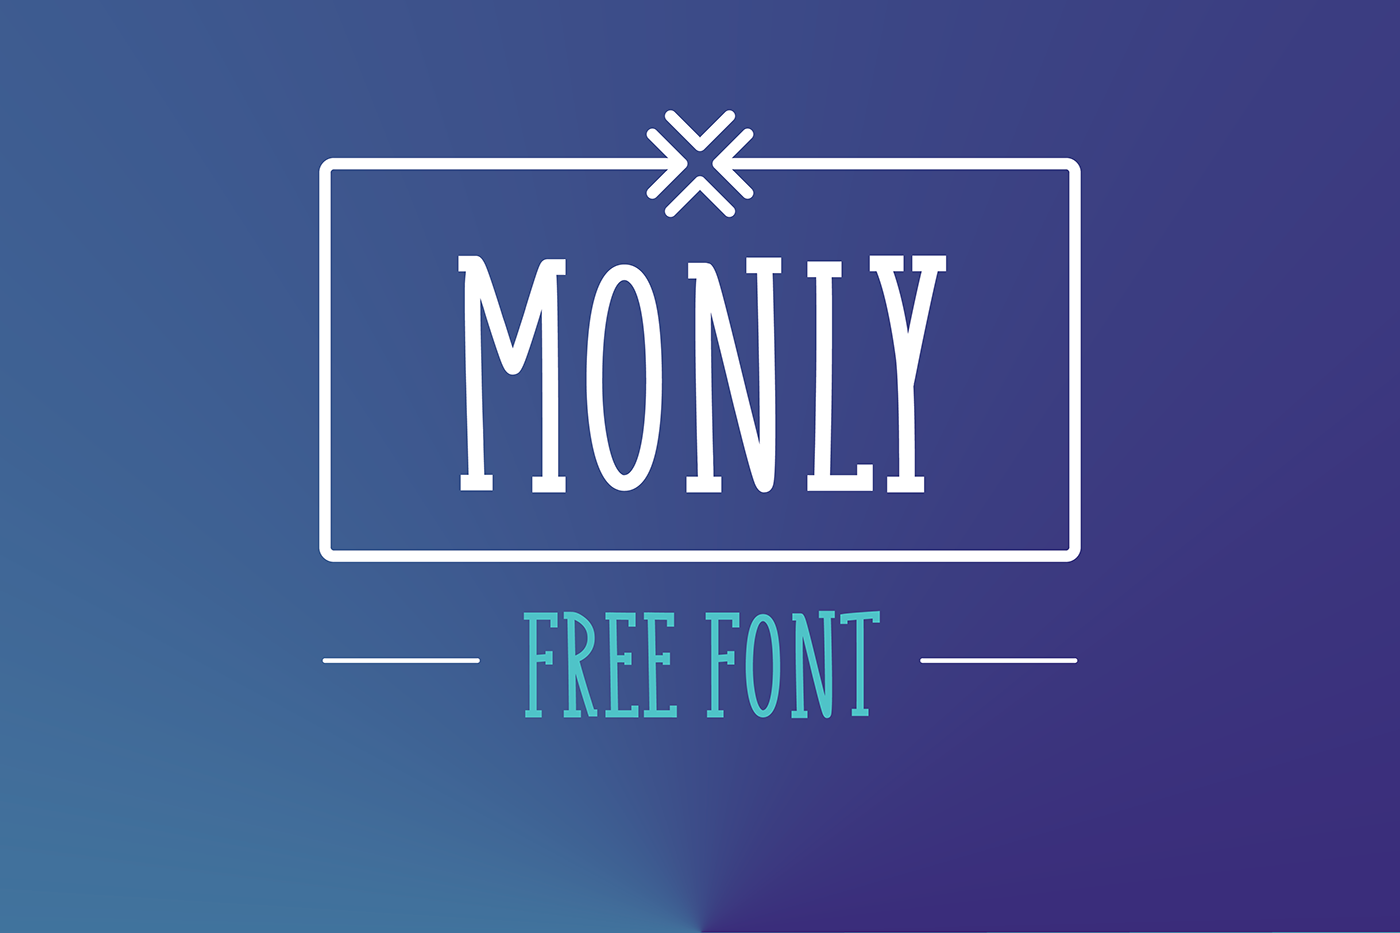 Free Download: Monly Font